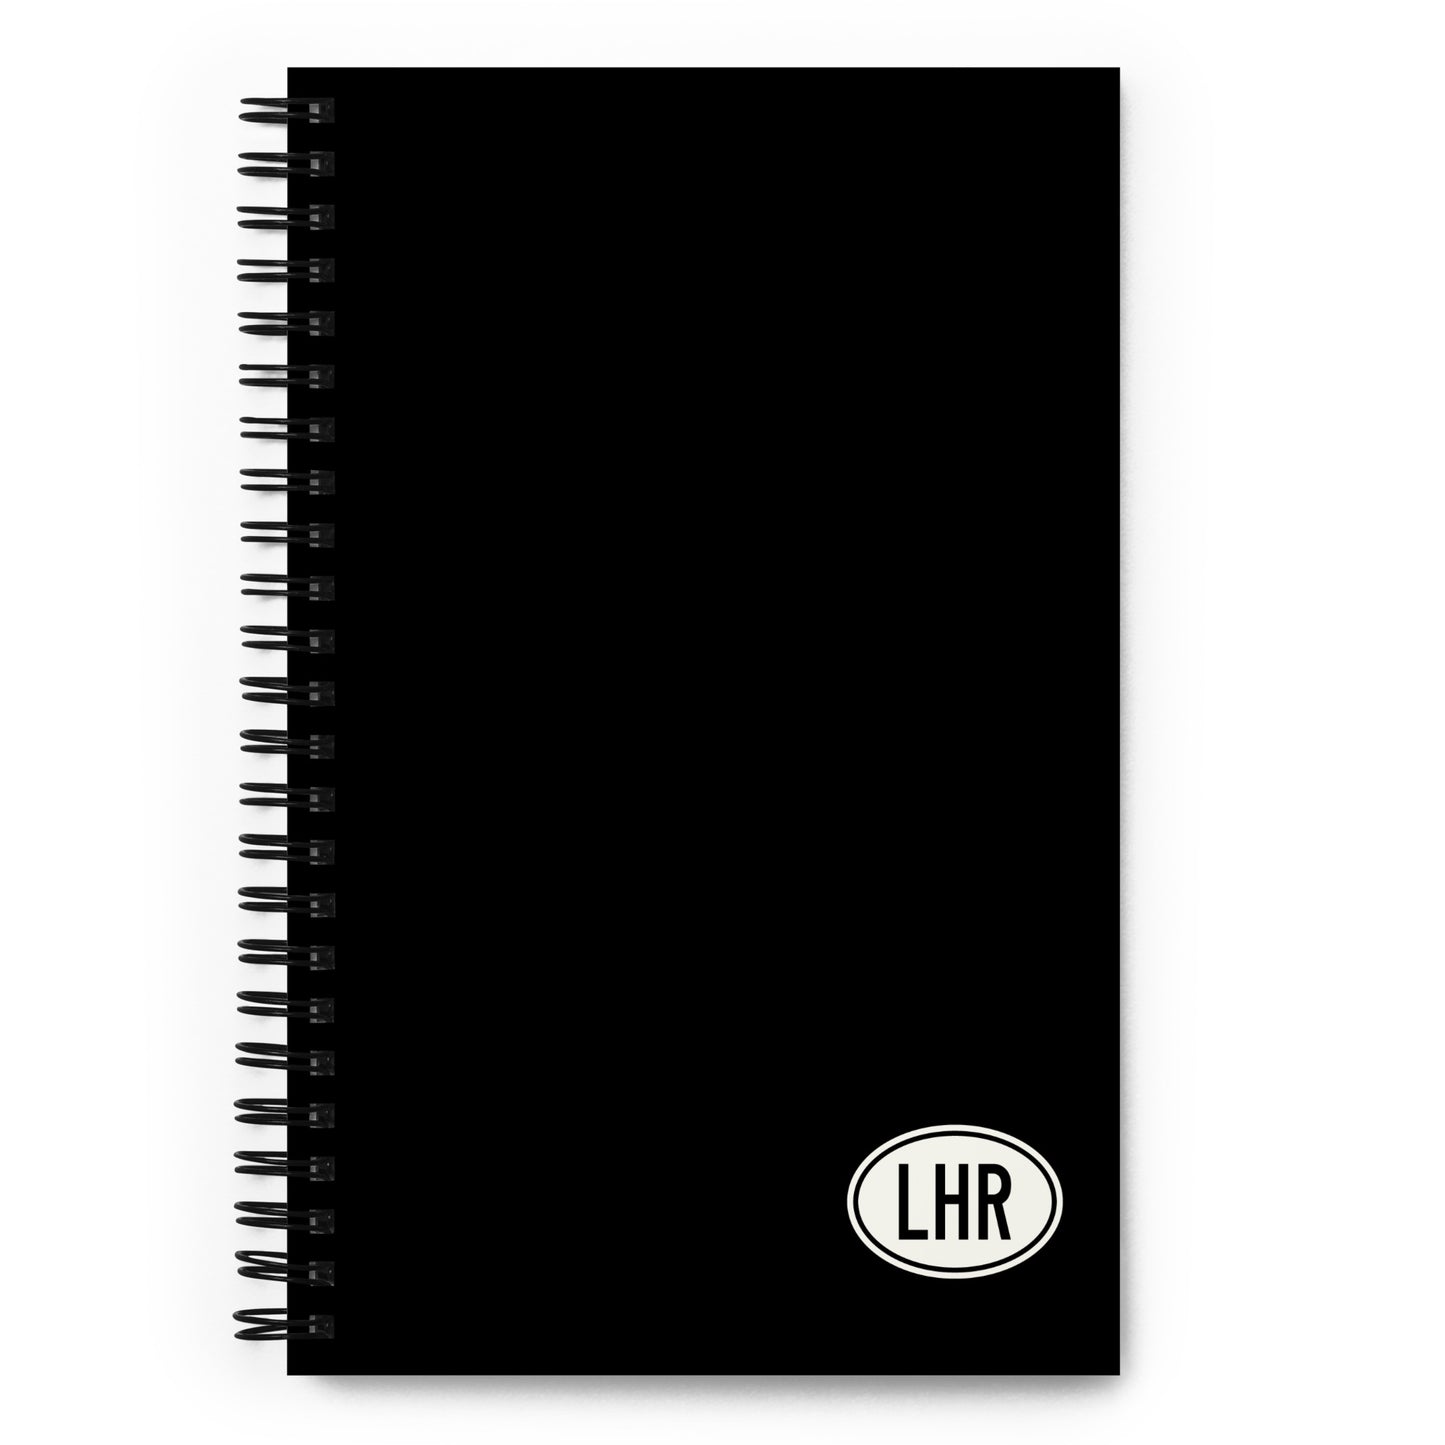 Unique Travel Gift Spiral Notebook - White Oval • LHR London • YHM Designs - Image 01